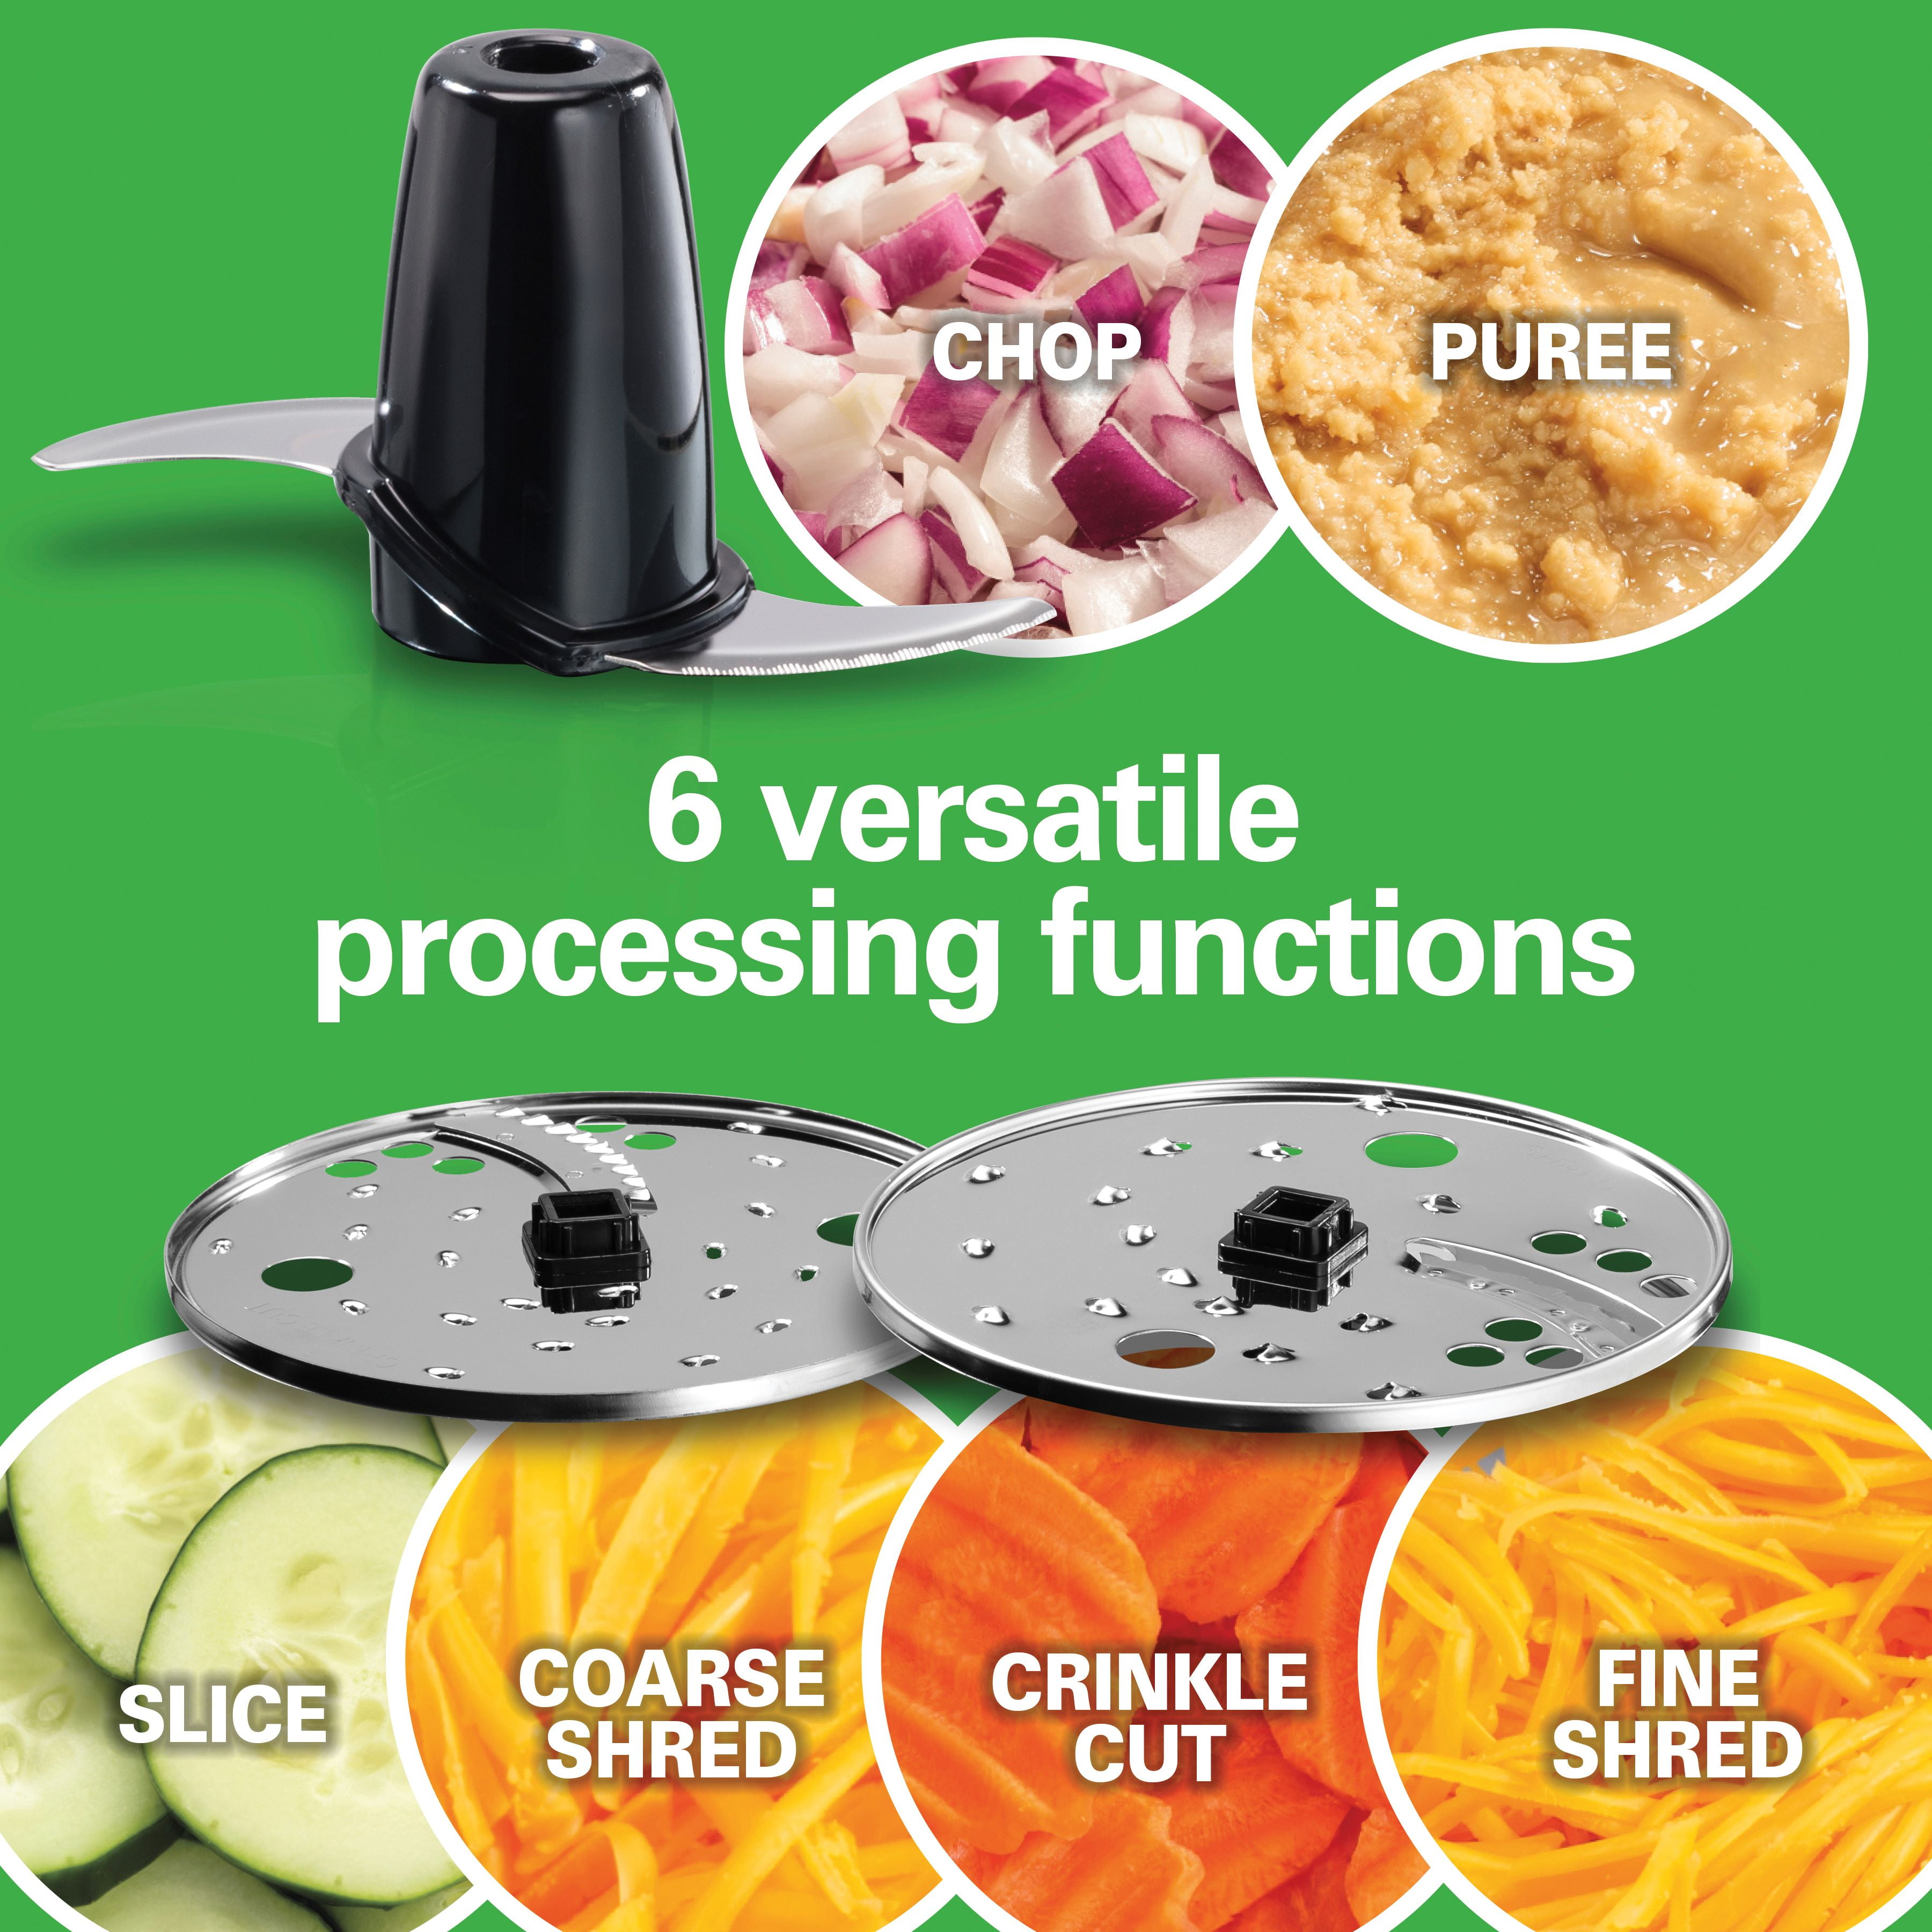 Hamilton Beach ChefPrep 10-Cup Food Processor & Vegetable Chopper with 6  Functions to Chop, Puree, Shred, Slice and Crinkle Cut, Black (70670)